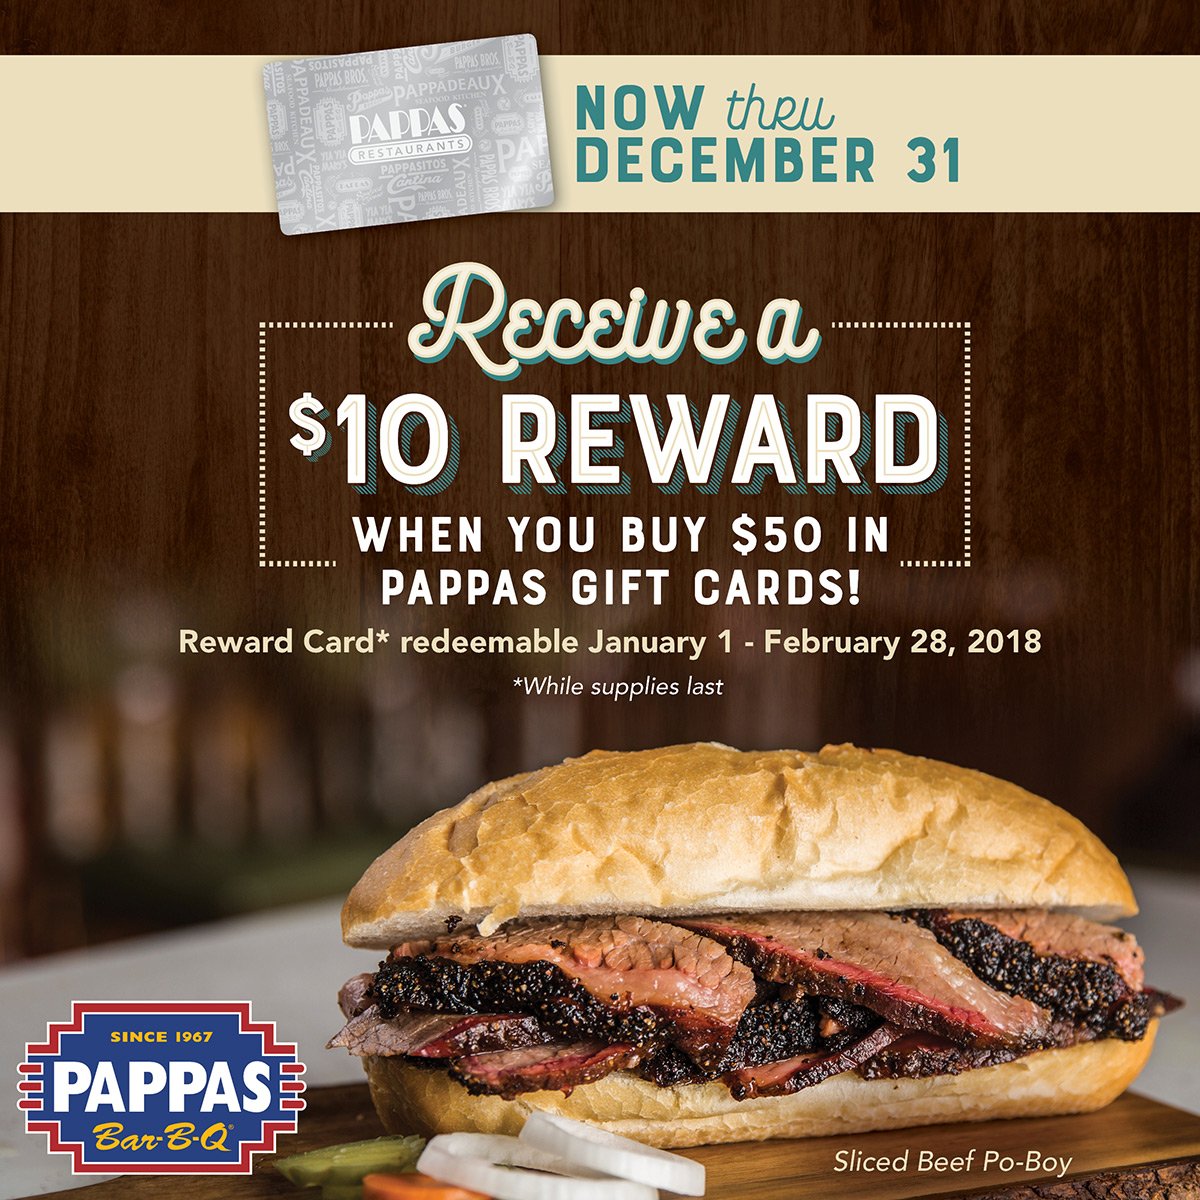 Pappas Bar B Q On Twitter 50 Gift Cards For Them 10 Reward You Available Purchase Now Thru December 31